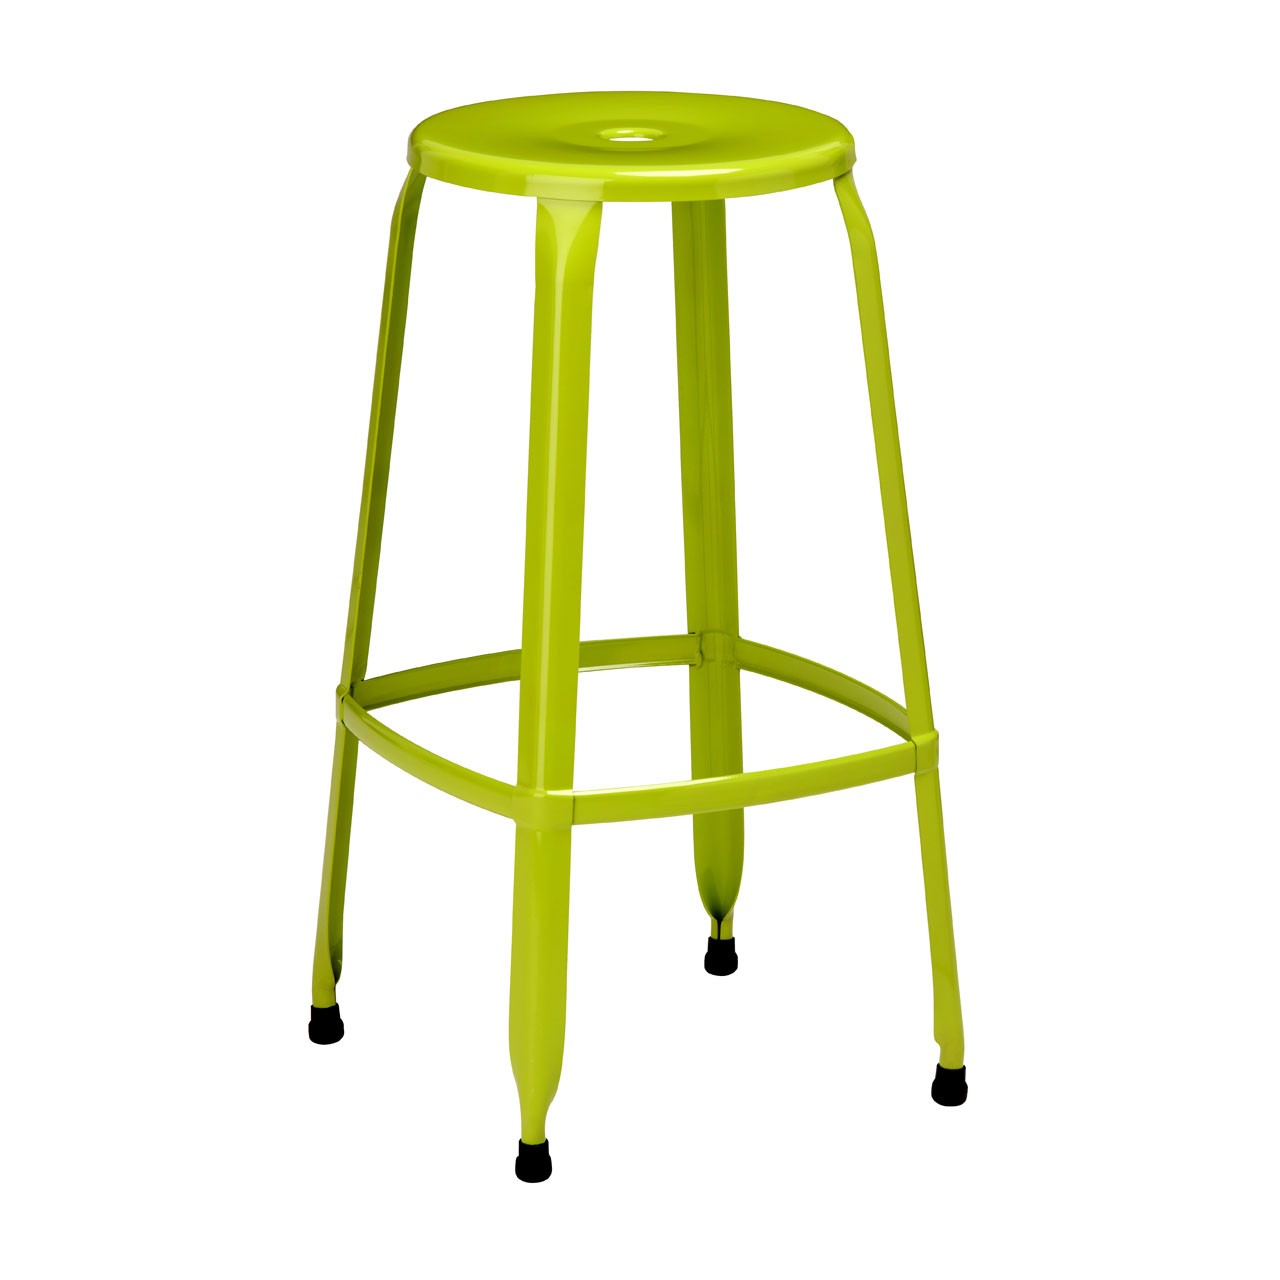 Disc Stool, Lime Green Powder Coated Metal - Set Of 4